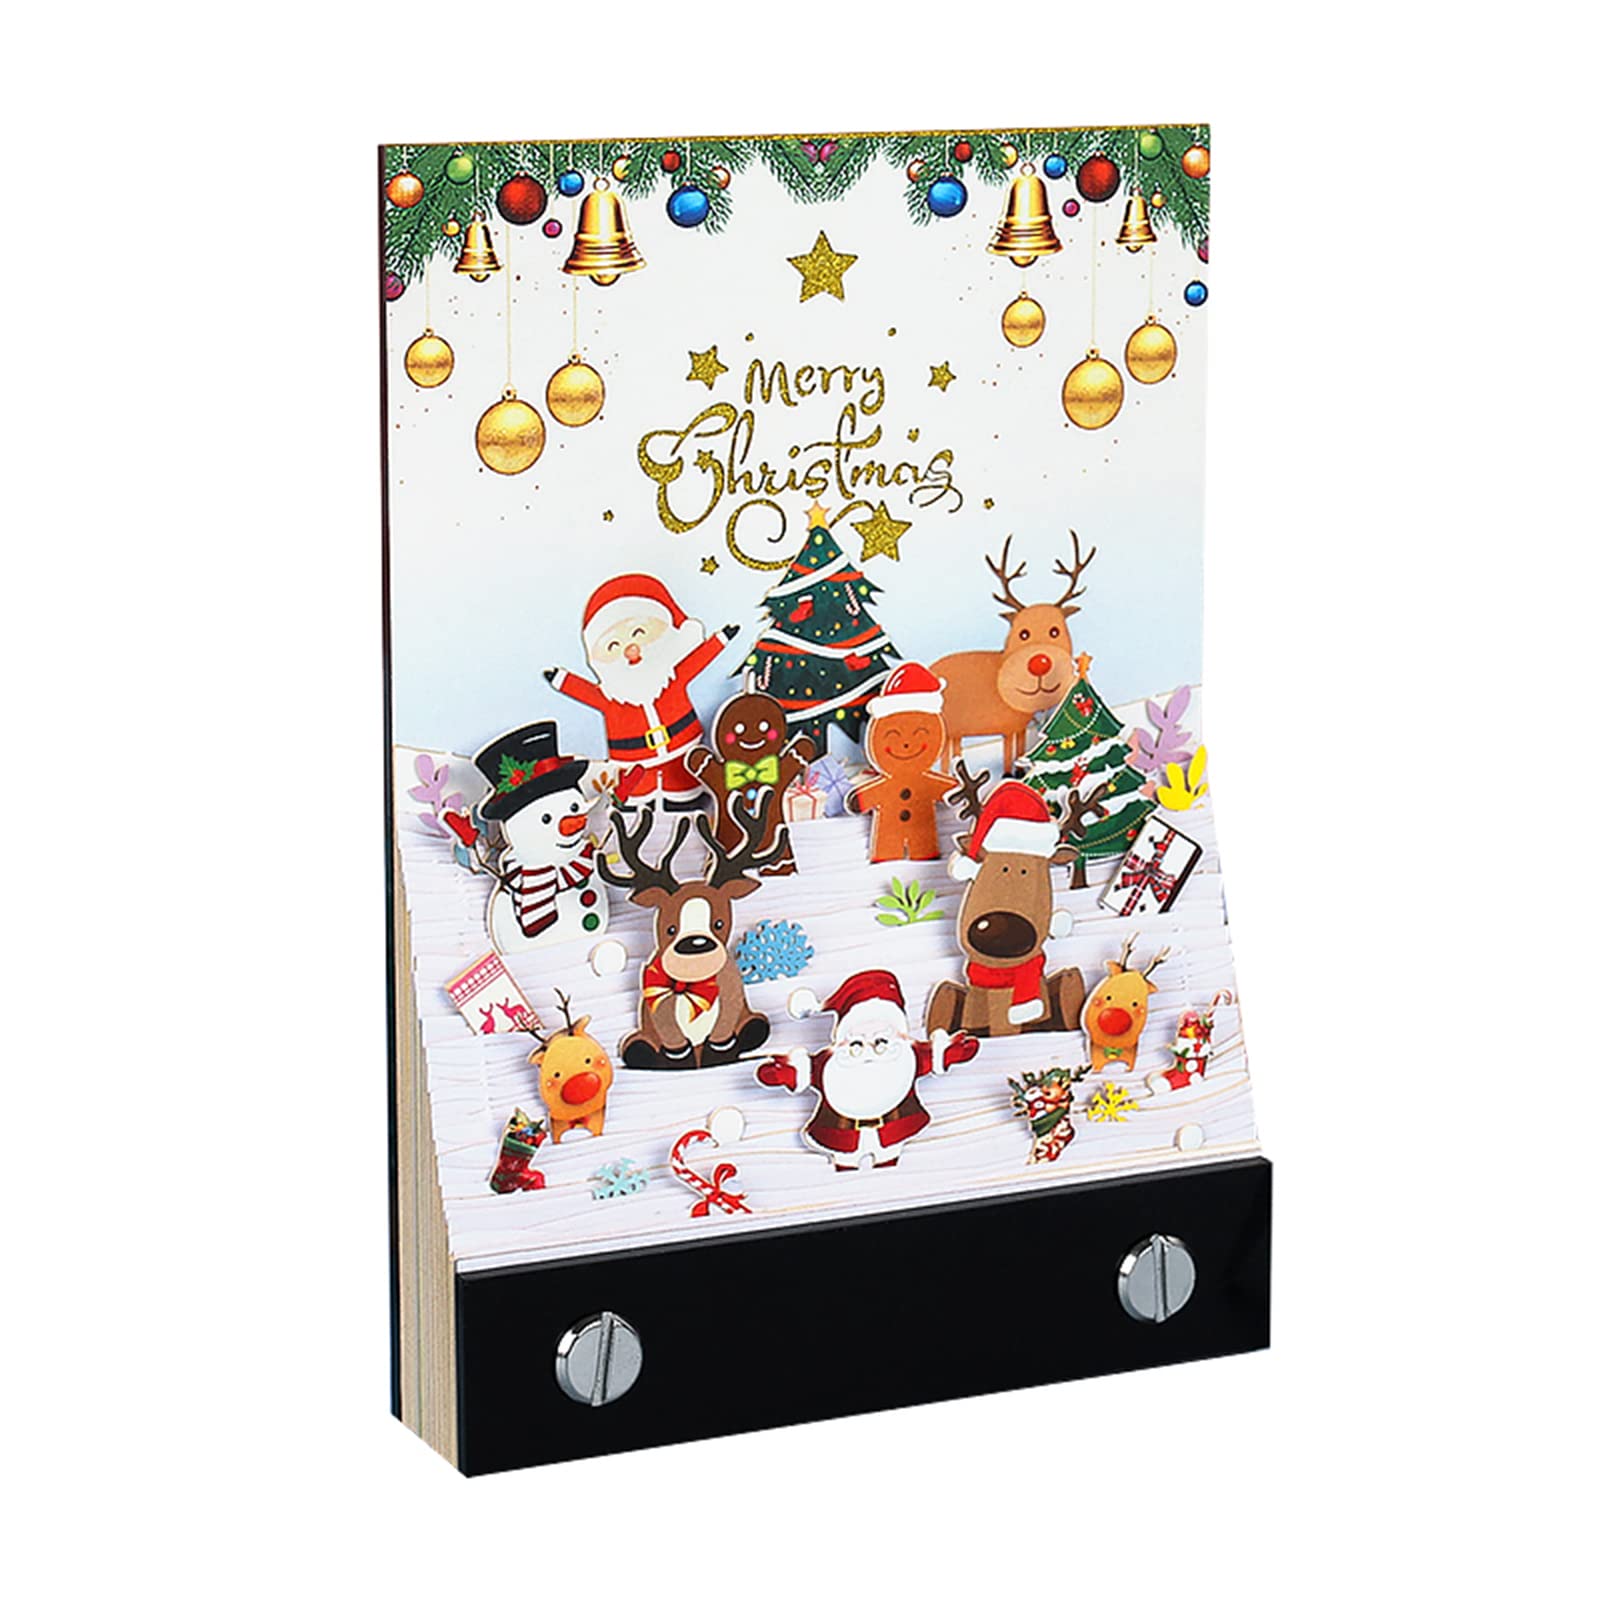 Christmas Party 3D Memo Pad - Cute 3D Paper Carving Art Notepad Creative Post Notes DIY Christmas Gifts-BOOK NOOK WORLD